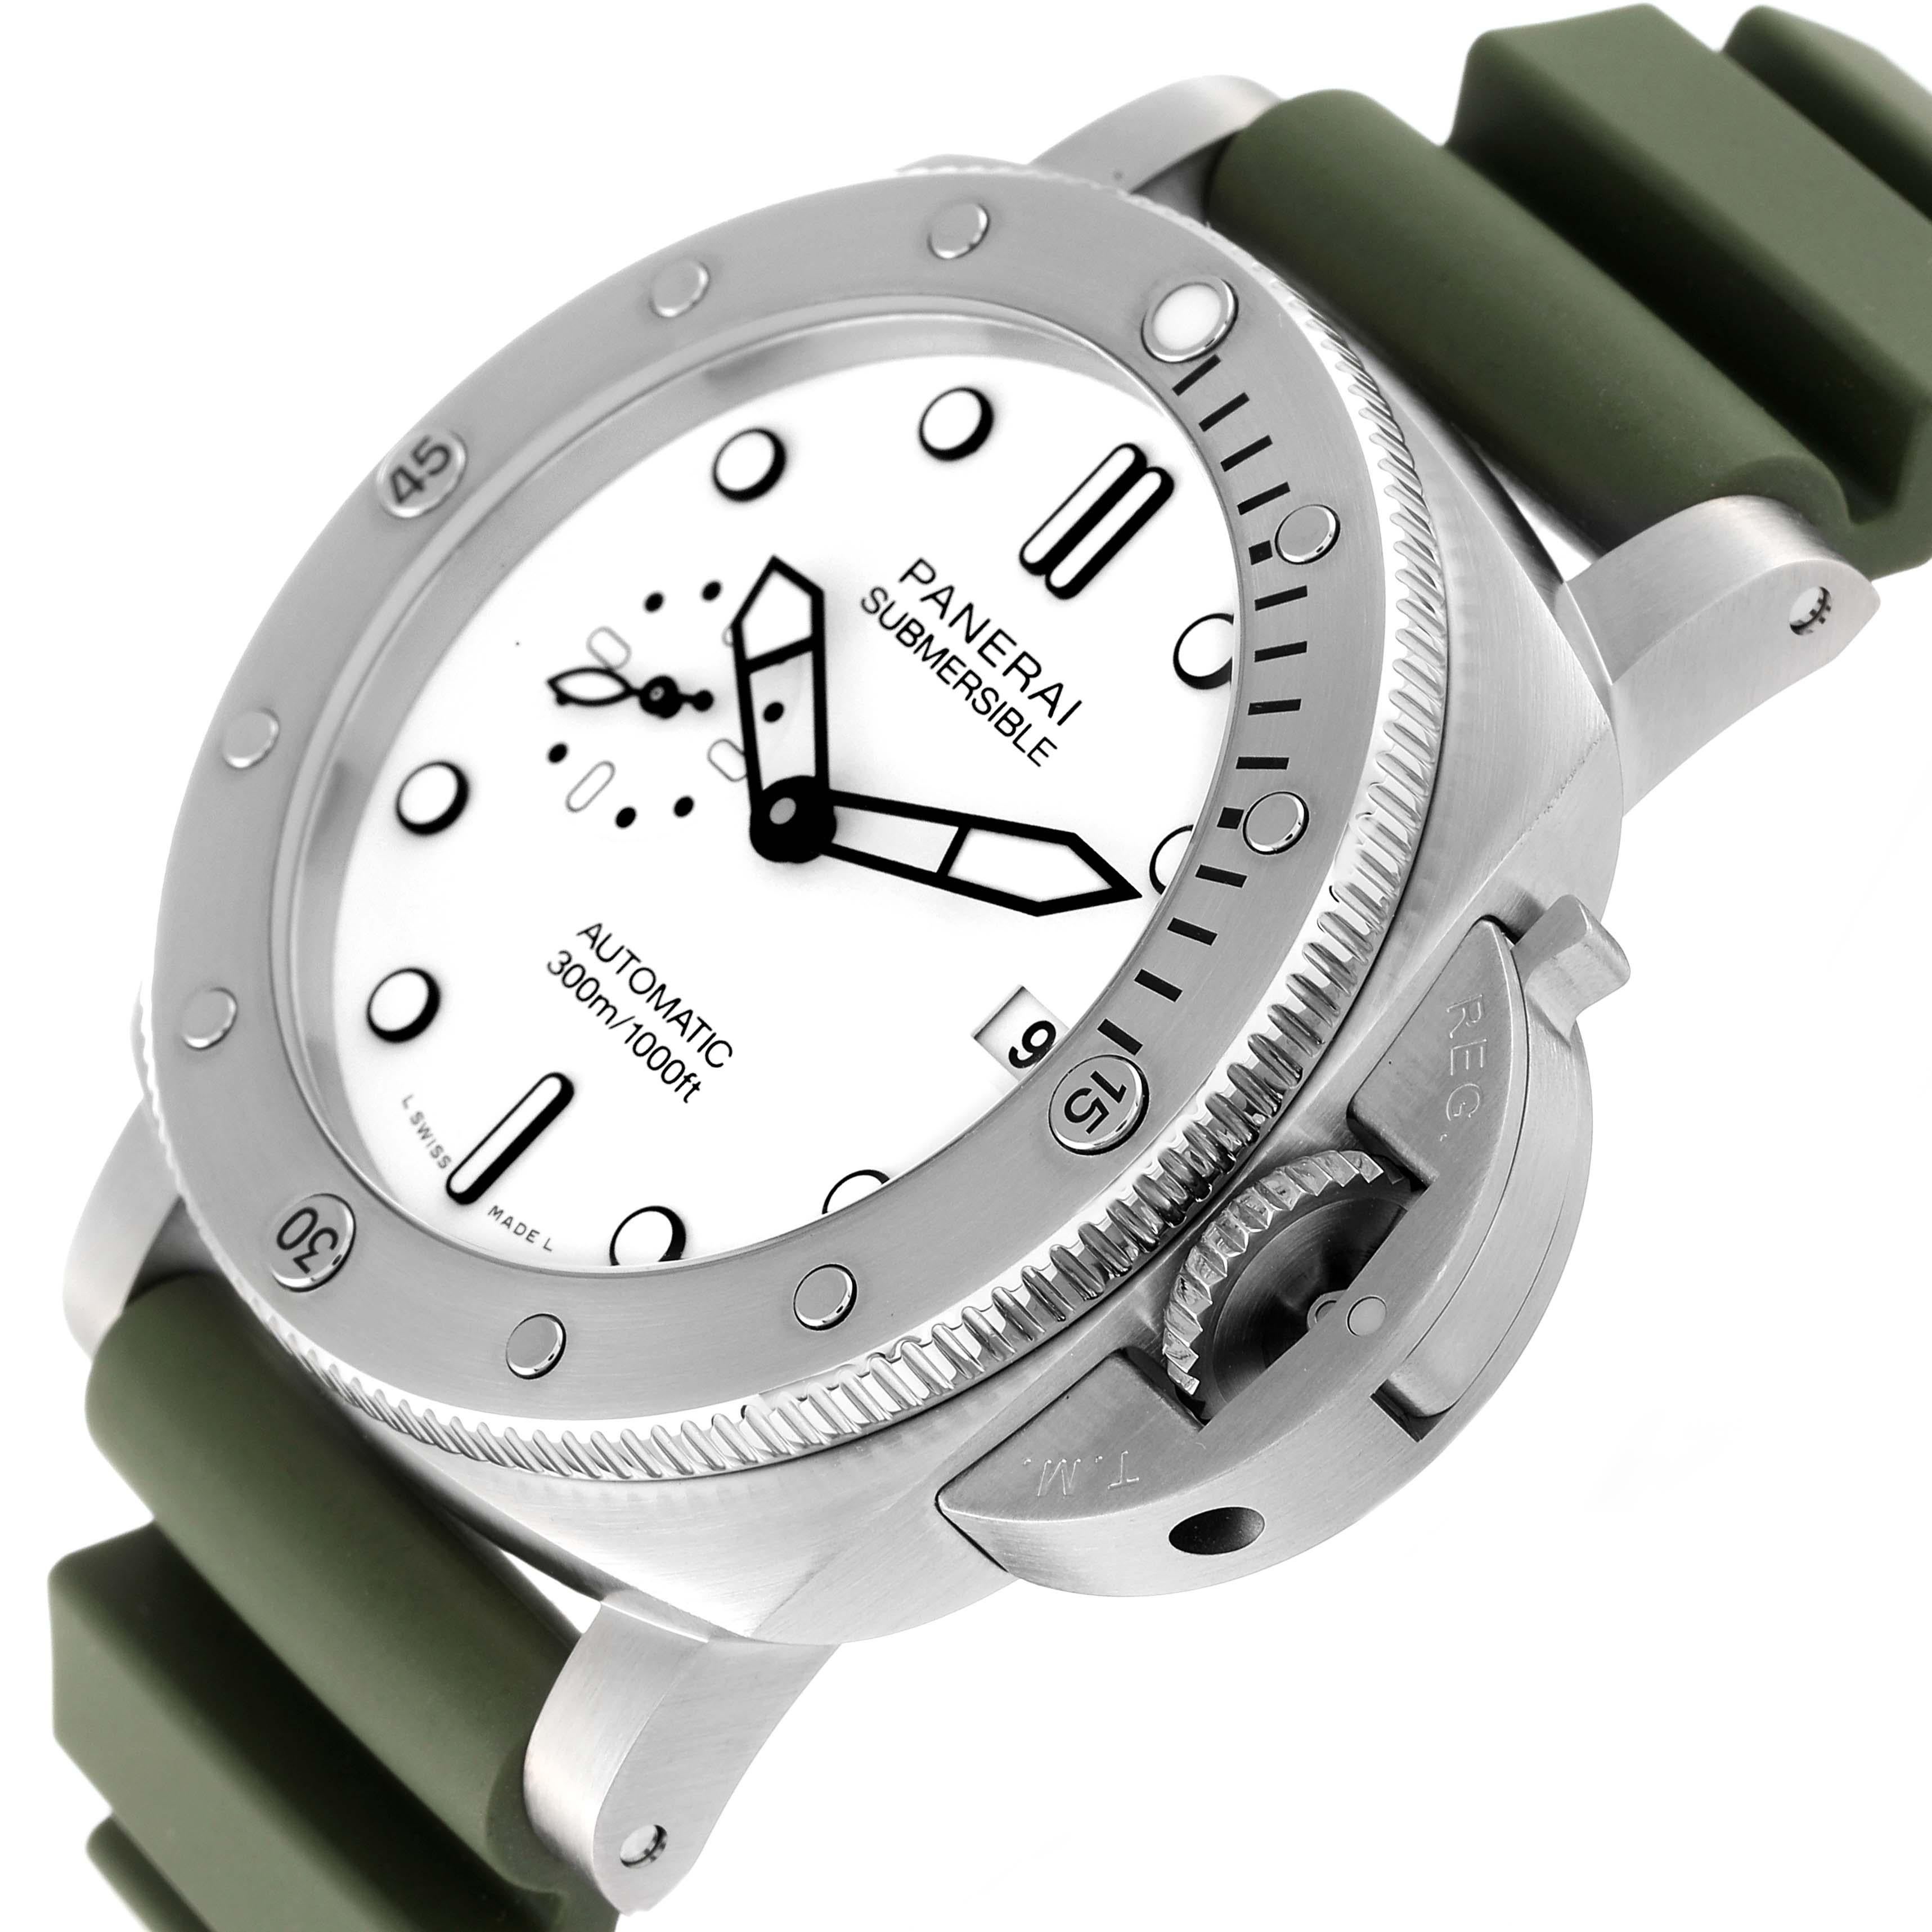 Panerai Submersible QuarantaQuattro Bianco Steel Mens Watch PAM01226 Box Card. Automatic self-winding movement. Stainless steel cushion case, 44.0 mm in diameter. Panerai patented crown protector. Unidirectional rotating diver's bezel. Scratch